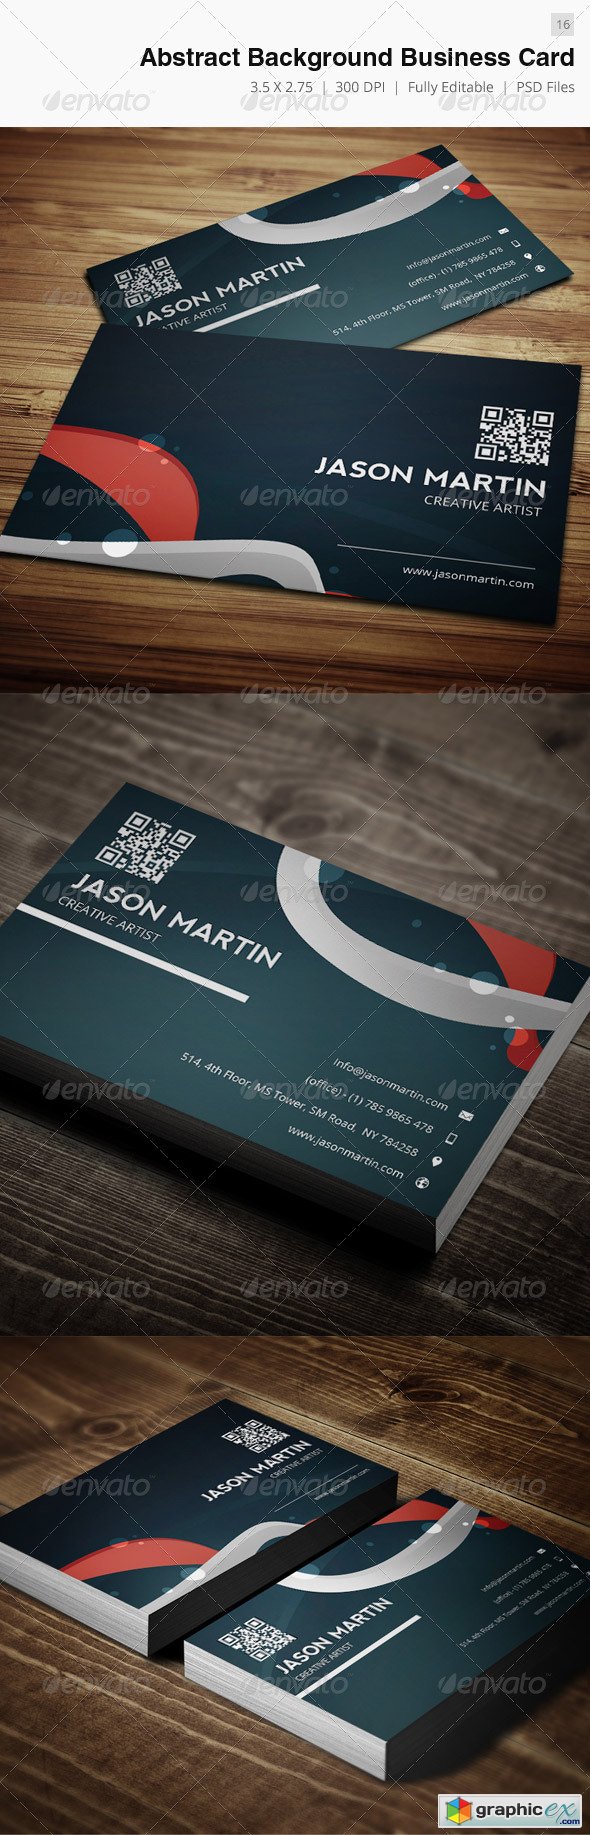 Abstract Background Creative Business Card 16